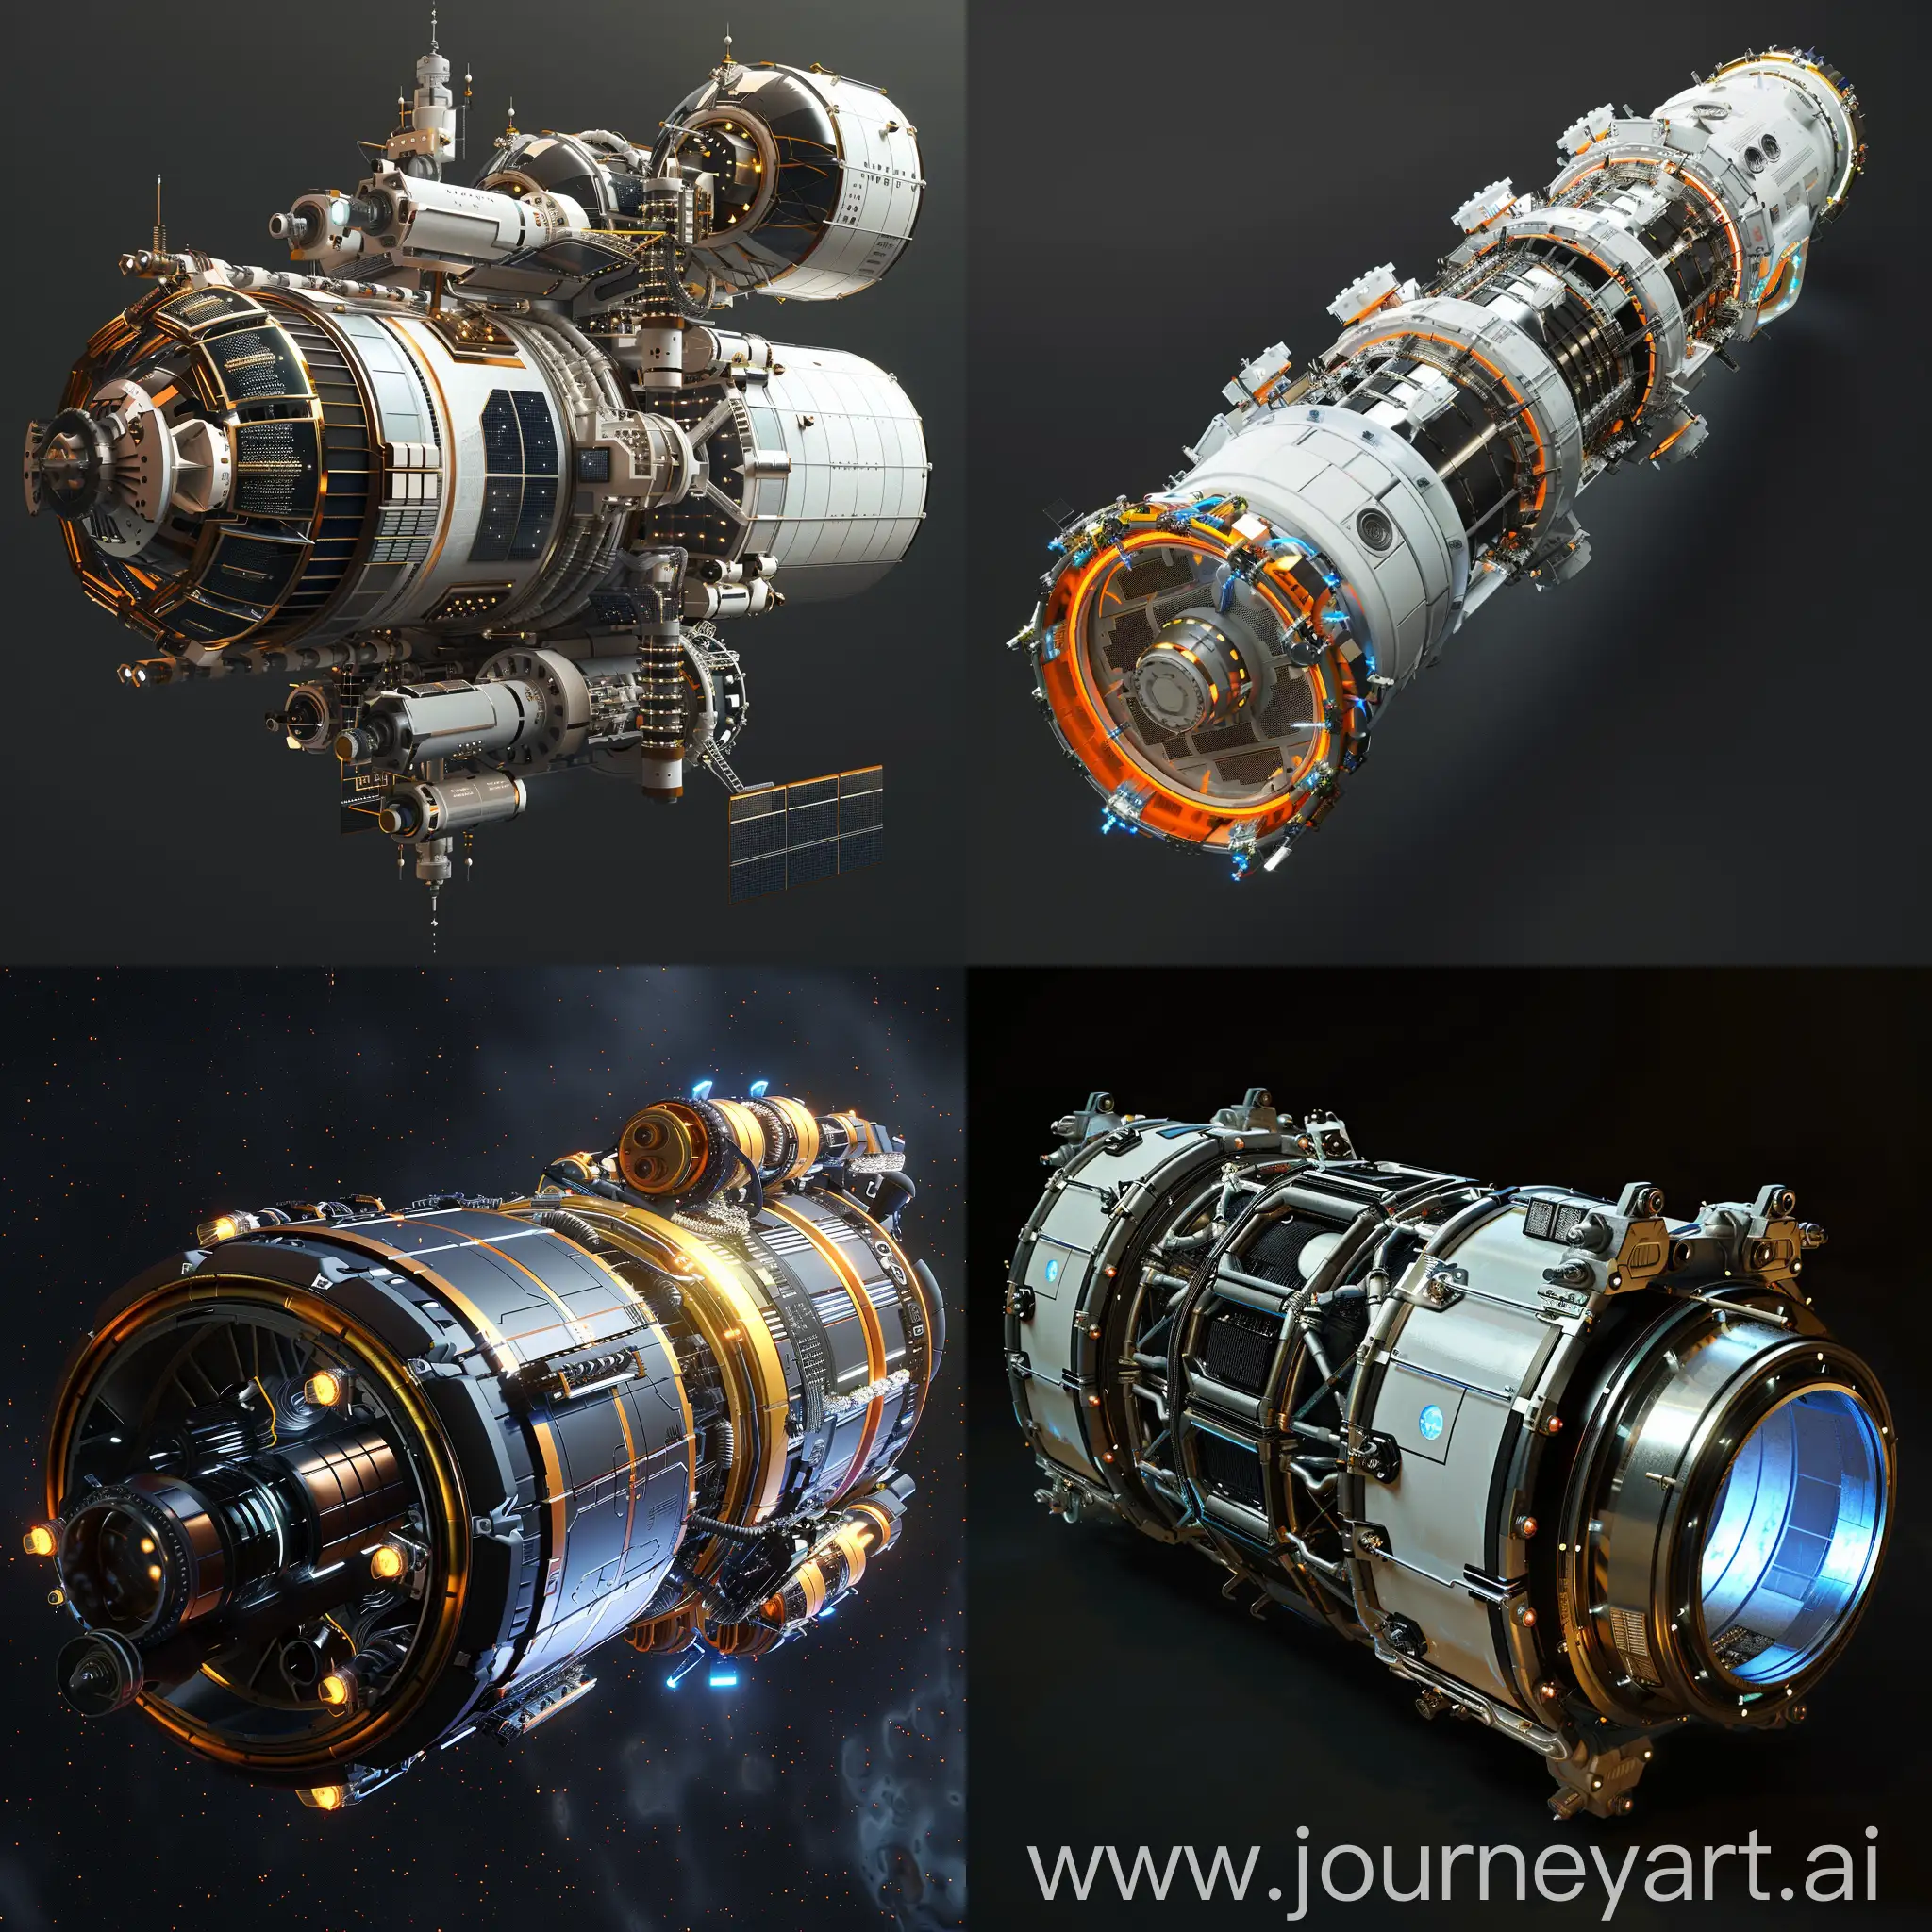 Advanced-SciFi-Space-Telescope-with-Modular-Construction-and-Holographic-Displays